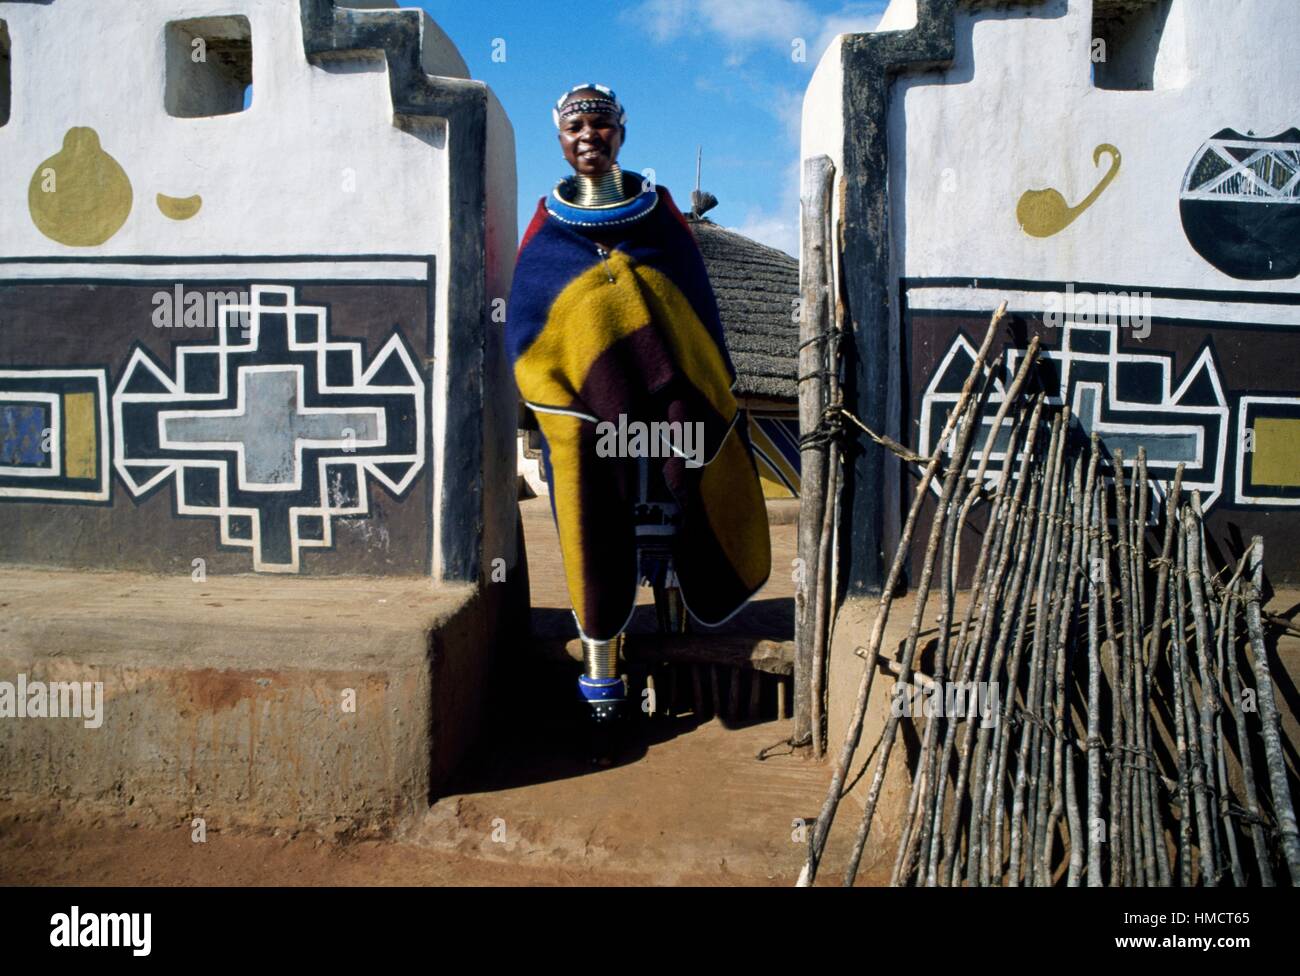 Ndebele man wearing a traditional costume at the entrance to a house with decorated walls, South Africa. Stock Photo